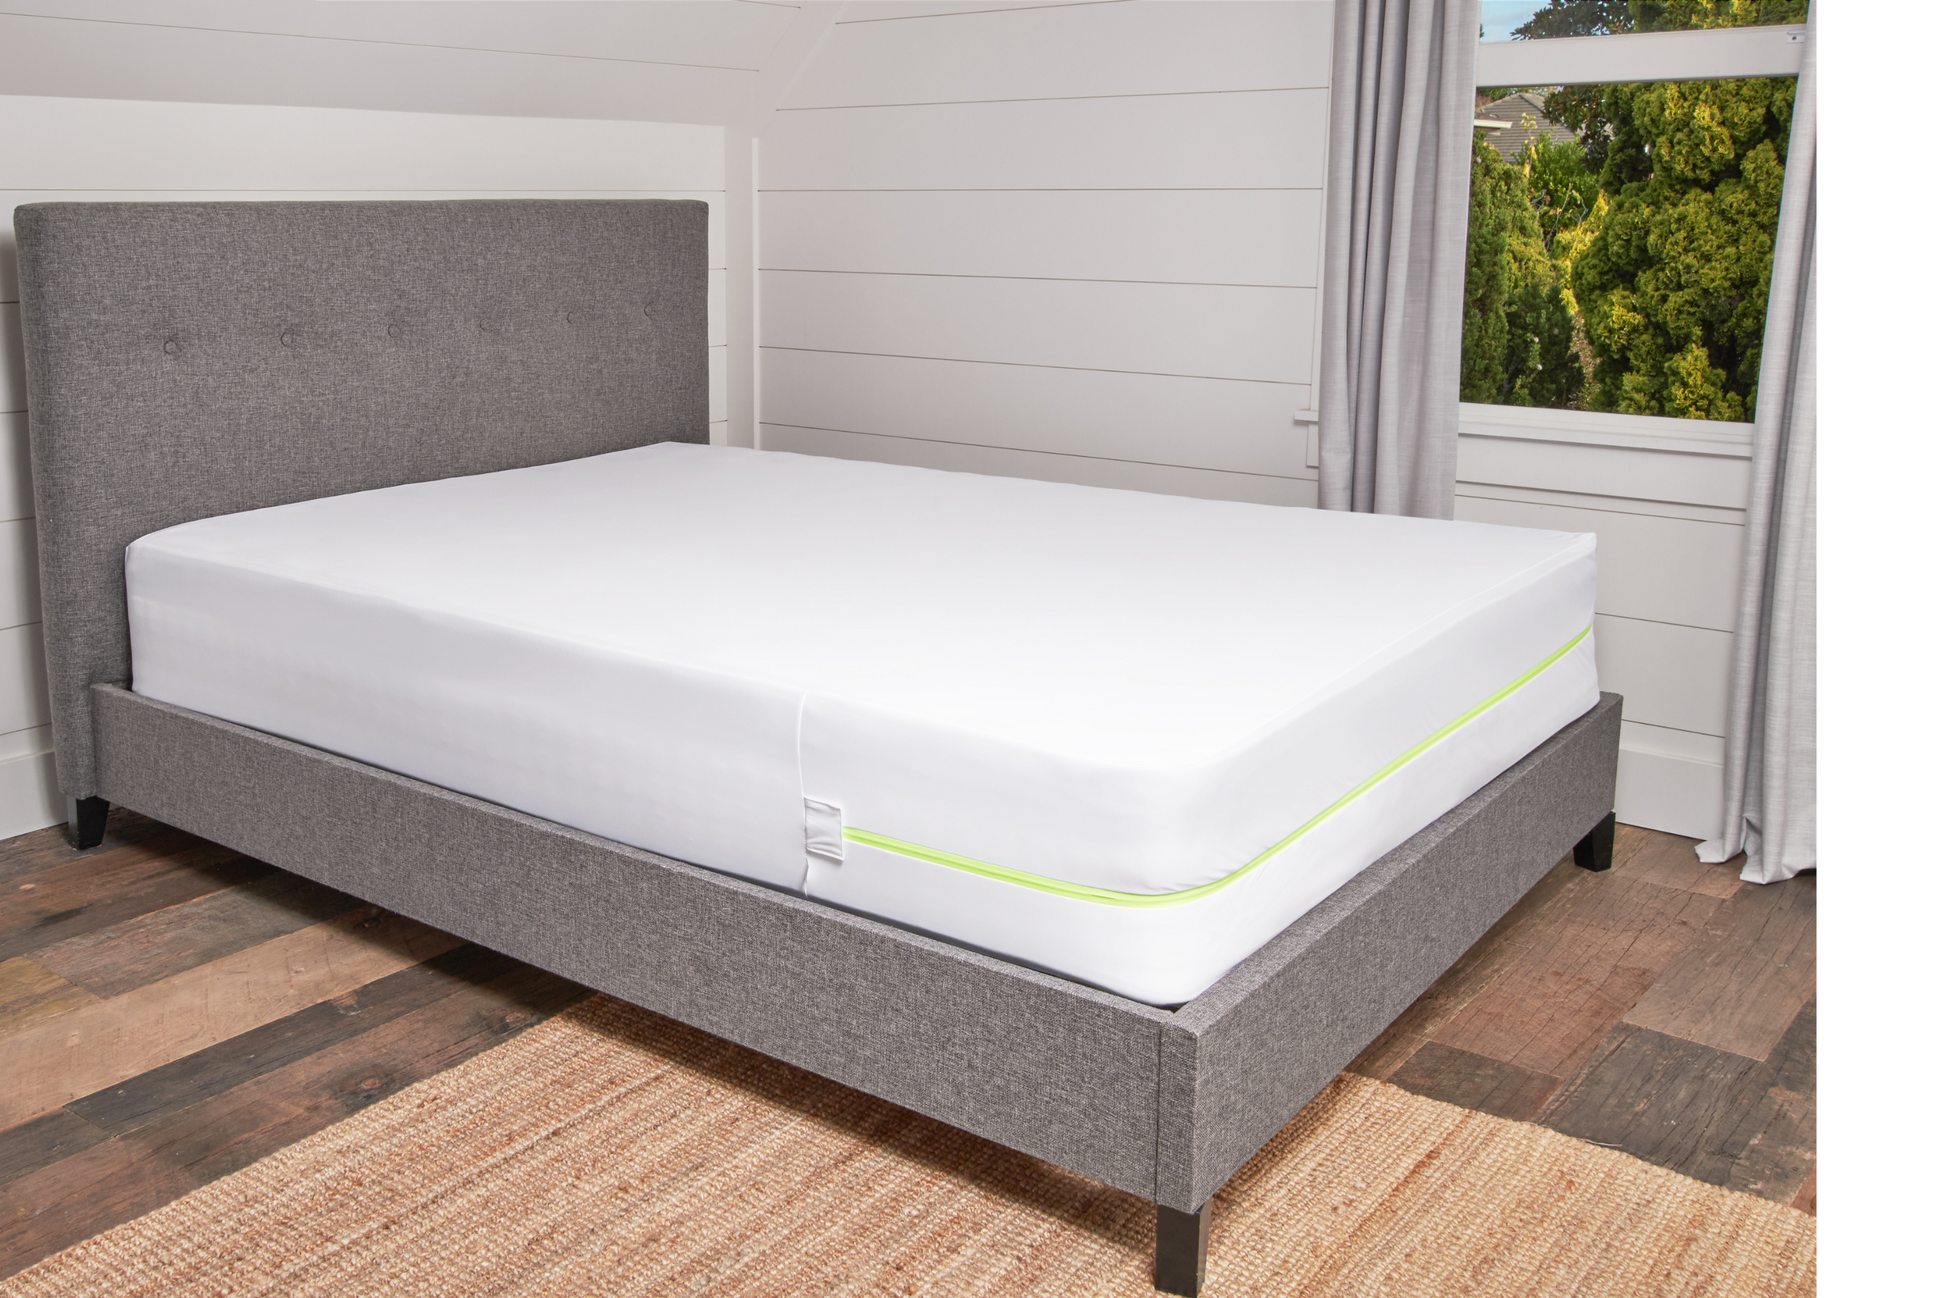 Picture Of A bed with a Anti Dust Mite Mattress case / protector / encasement